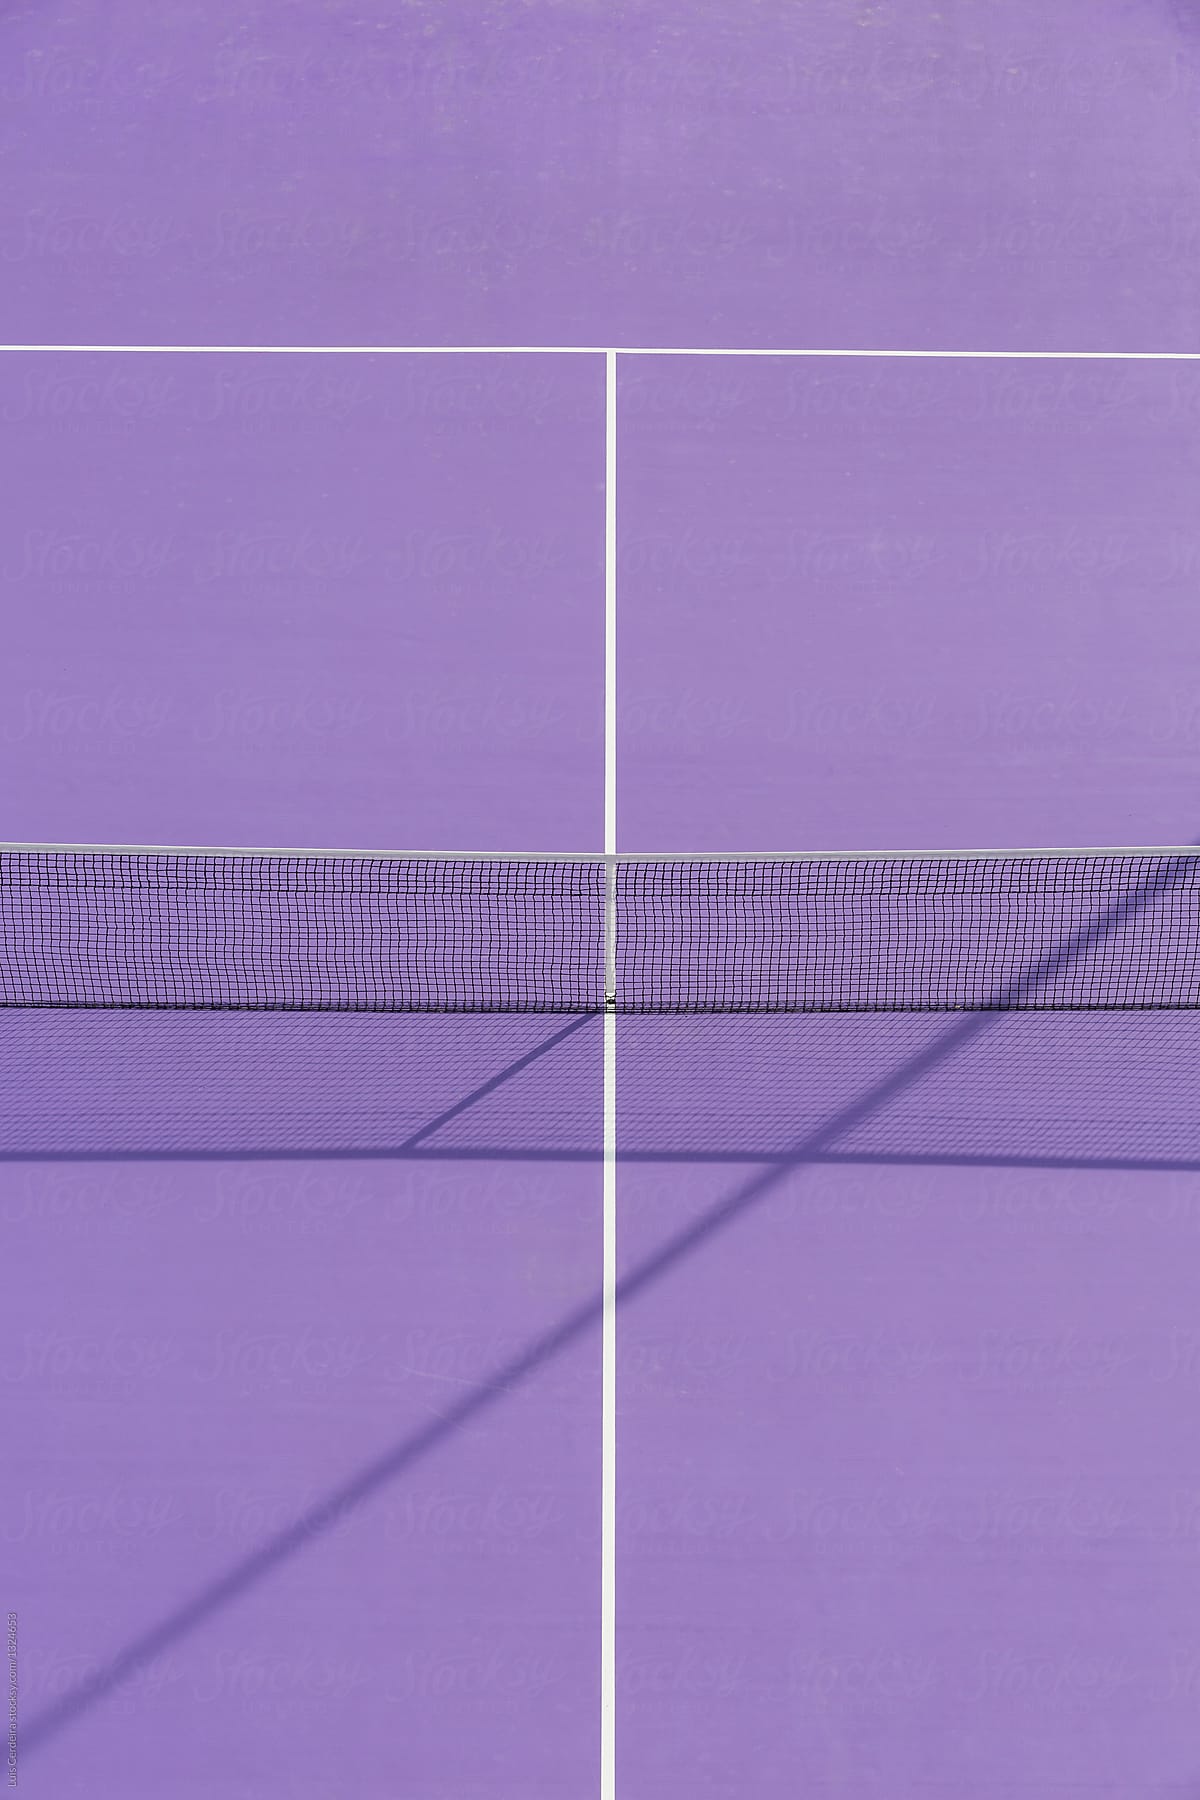 colorful tennis